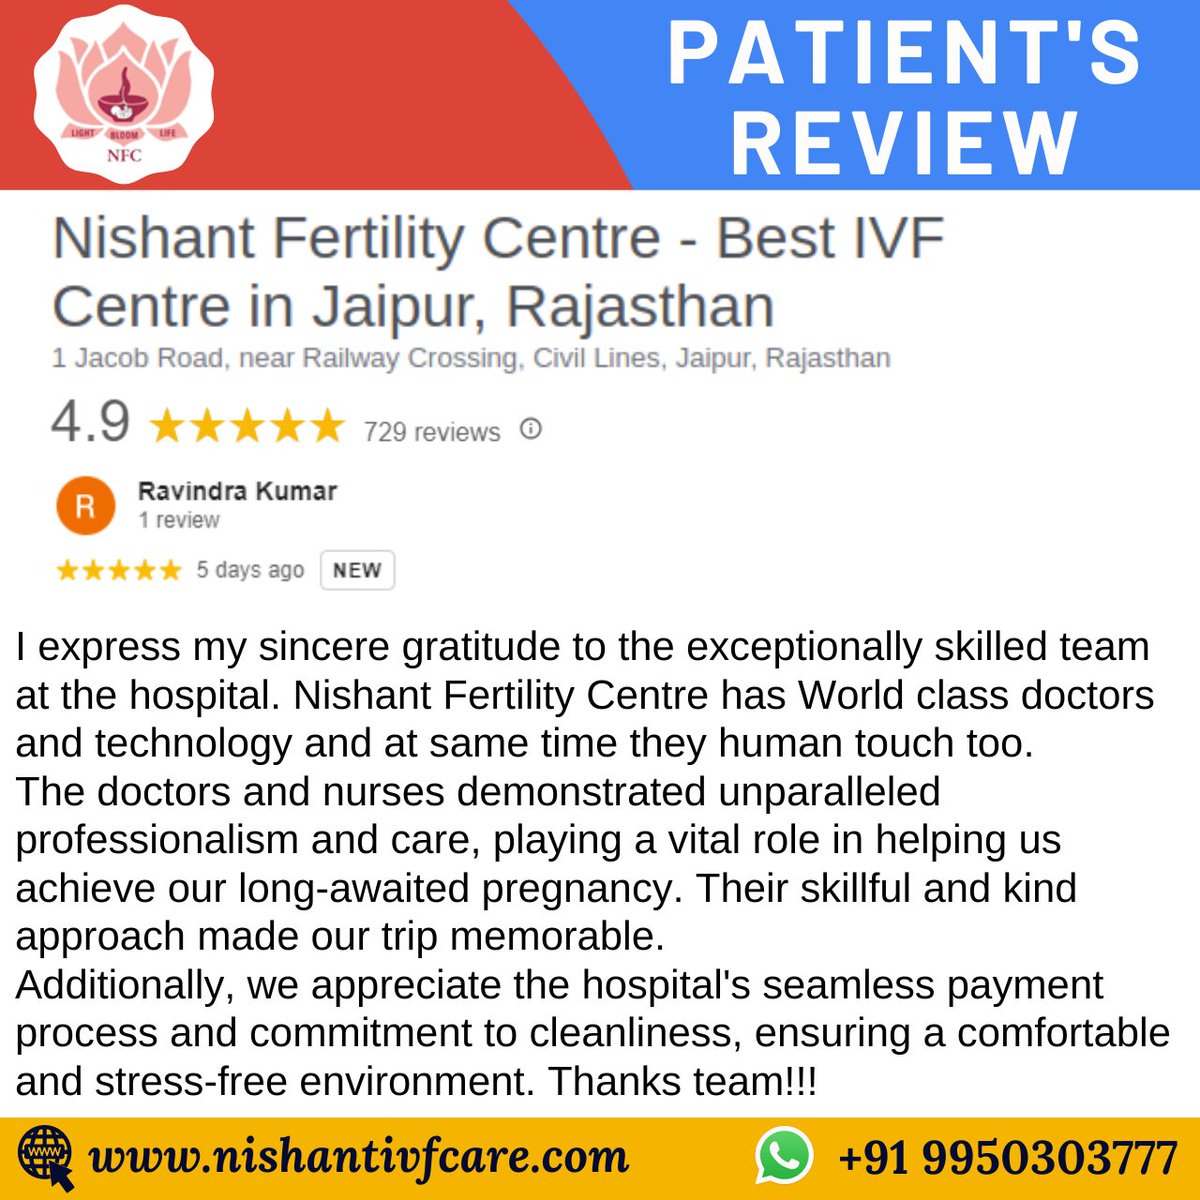 The happiness of our patients is our top concern! 
Call- +91 9950303777

#testimonials #feedbacks #reviews #googlereview #happypatient #ivfcost #testtubebabycentre #ferilitytreatment #infertility #fertilityclinic #Trending #Twitter #ivfbaby #Nishnat #ivf #jaipur #drnishantDixit